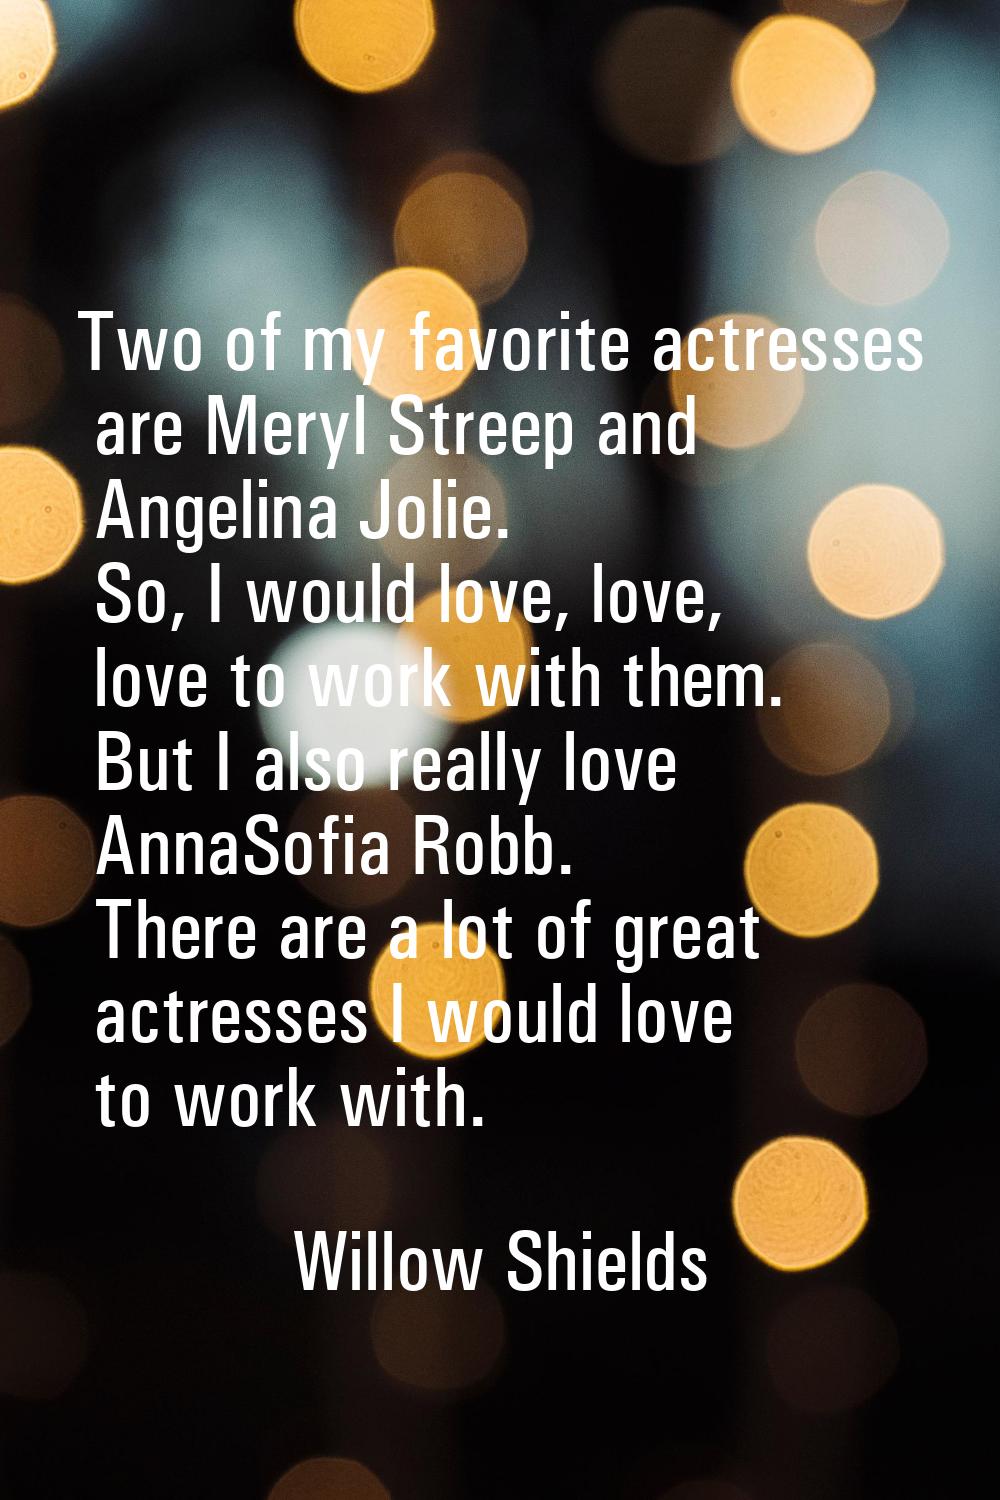 Two of my favorite actresses are Meryl Streep and Angelina Jolie. So, I would love, love, love to w